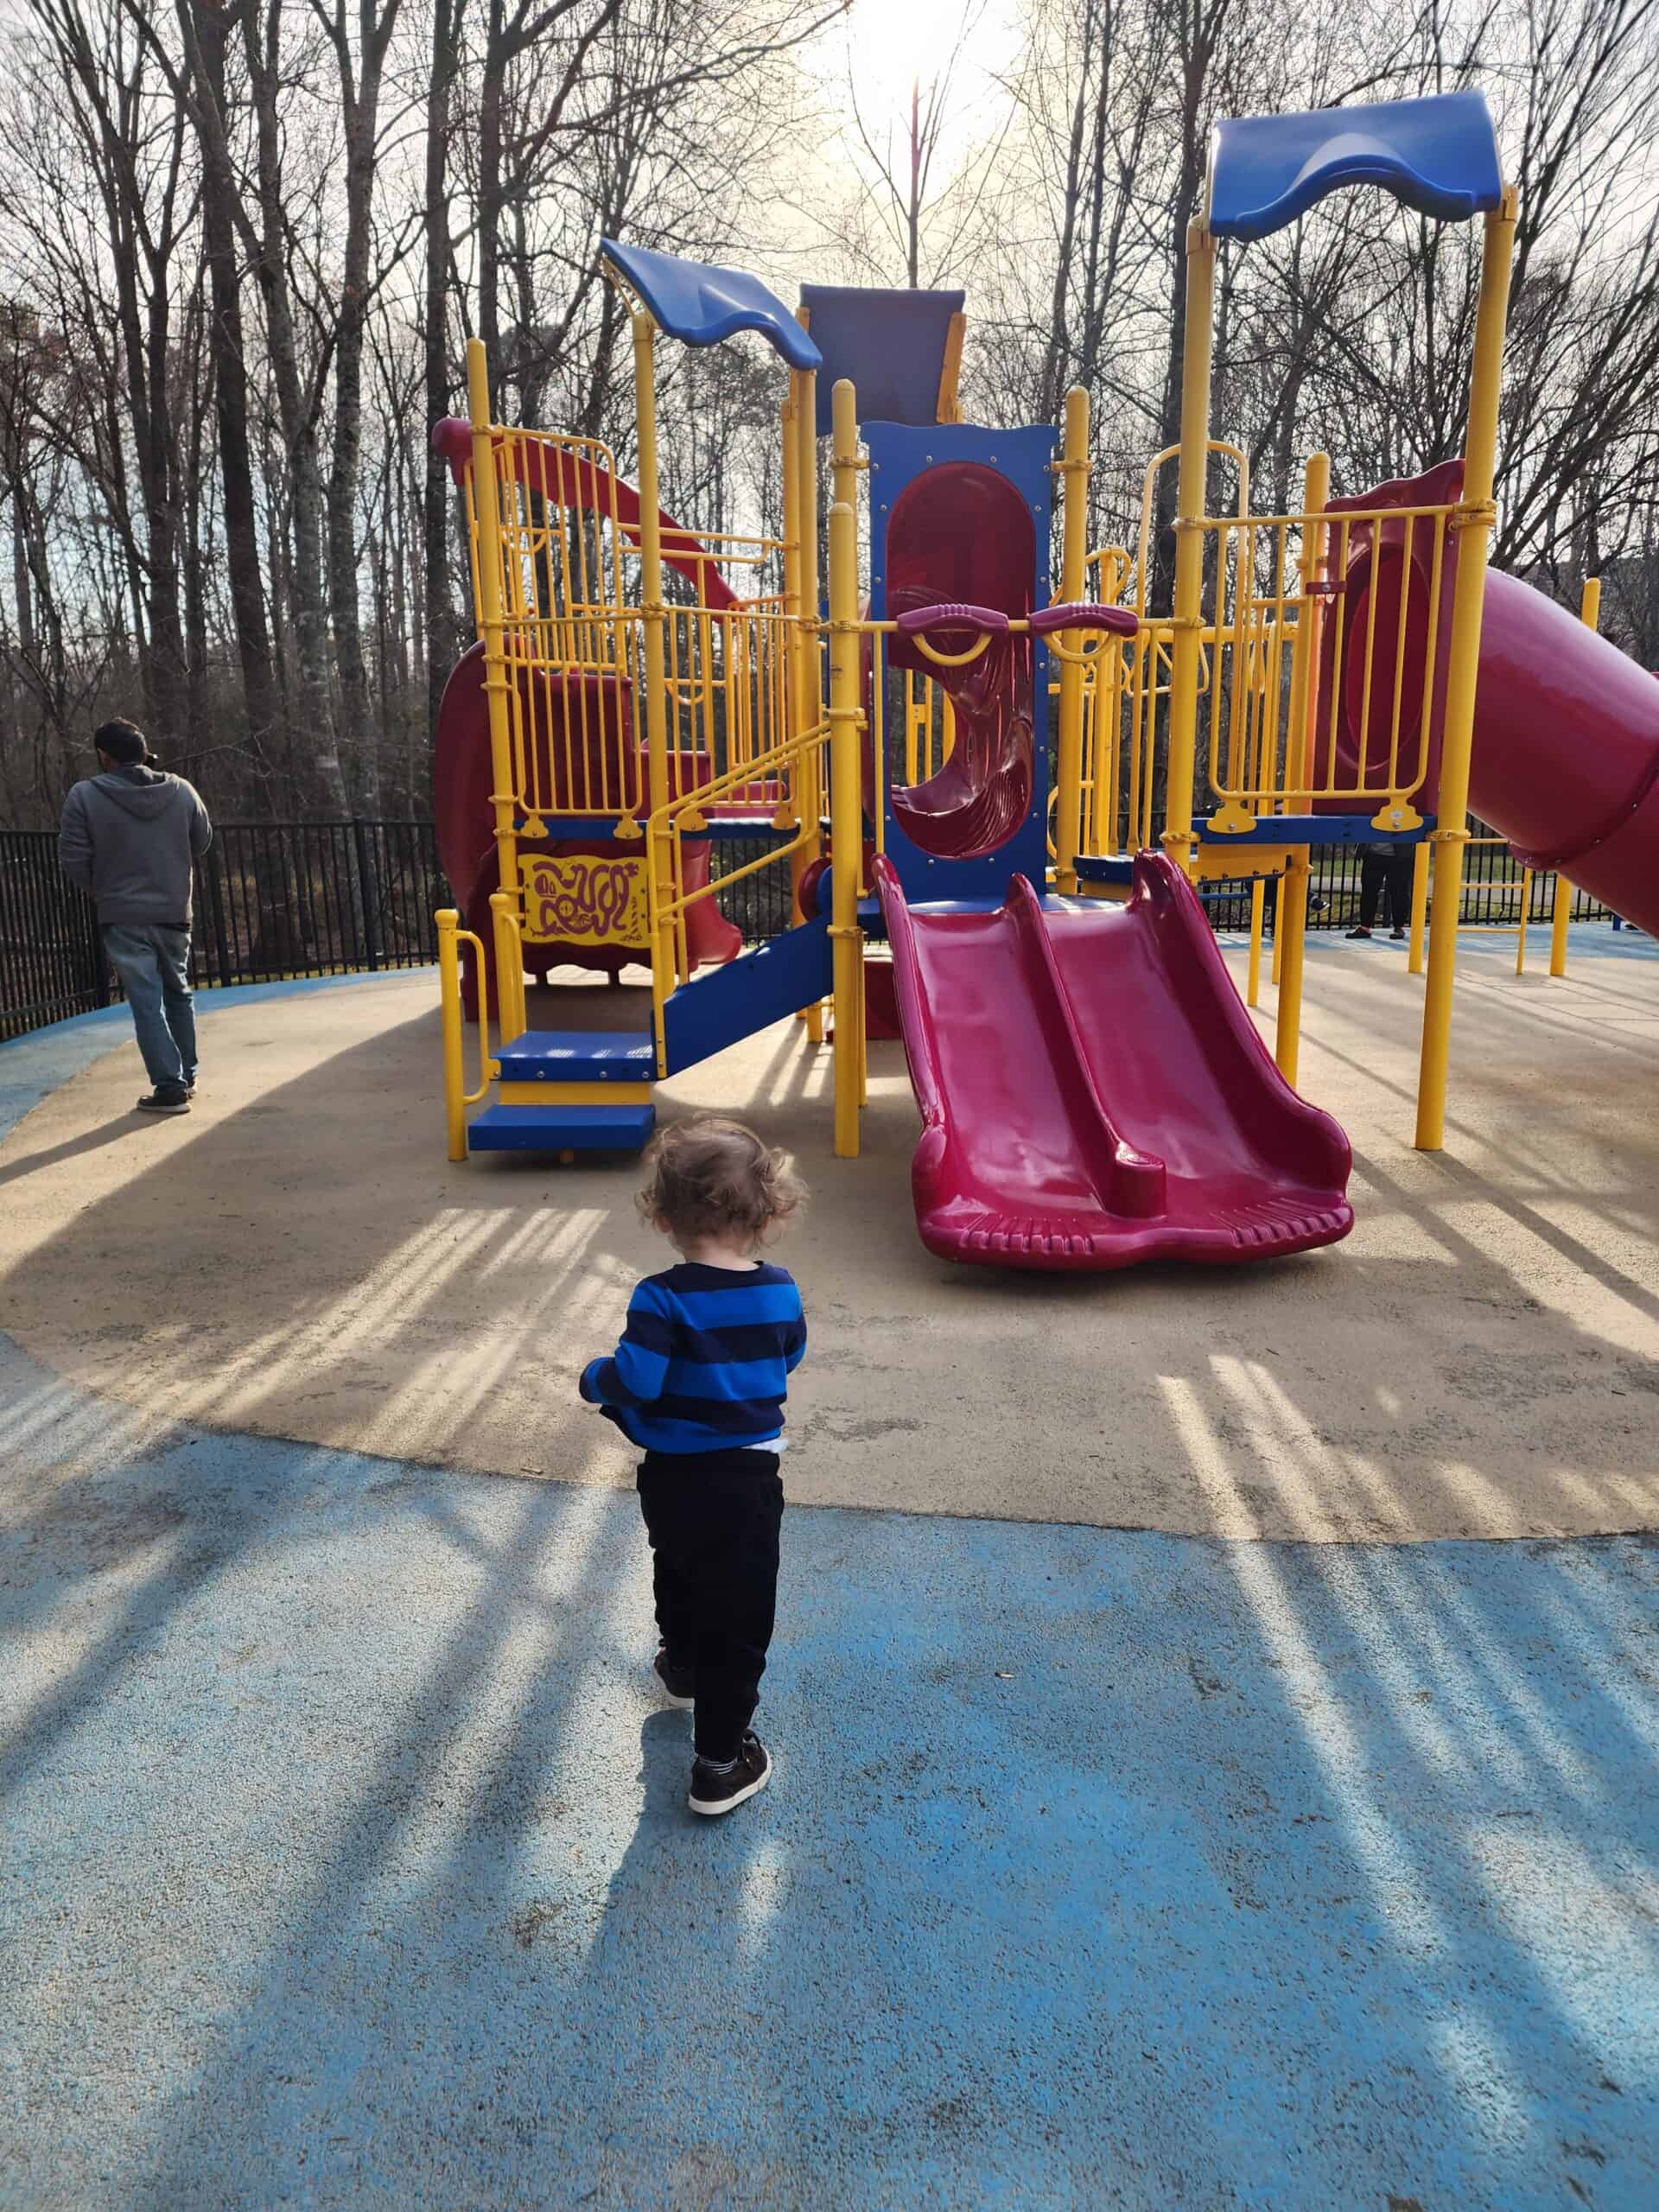 A curious toddler in a blue and black striped shirt walks towards a colorful playground with yellow railings and a vibrant red slide, with bare trees in the background and a blue safety surface underfoot.